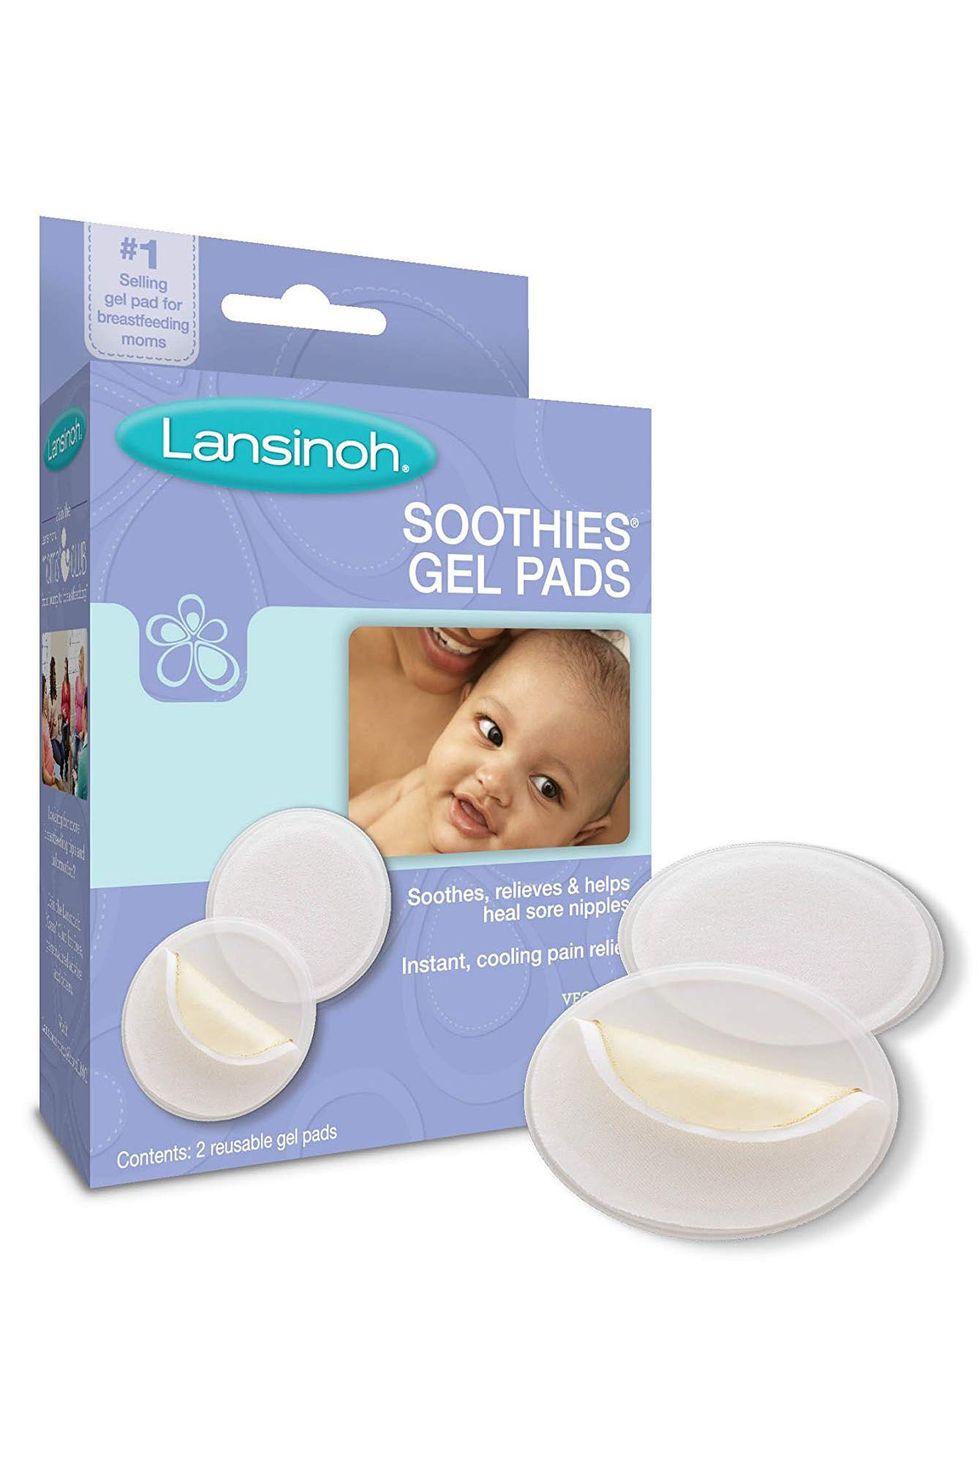 https://hips.hearstapps.com/vader-prod.s3.amazonaws.com/1545573119-lansinoh-soothies-gel-pads-for-breastfeeding-1545573097.jpg?crop=1.00xw:1xh;center,top&resize=980:*